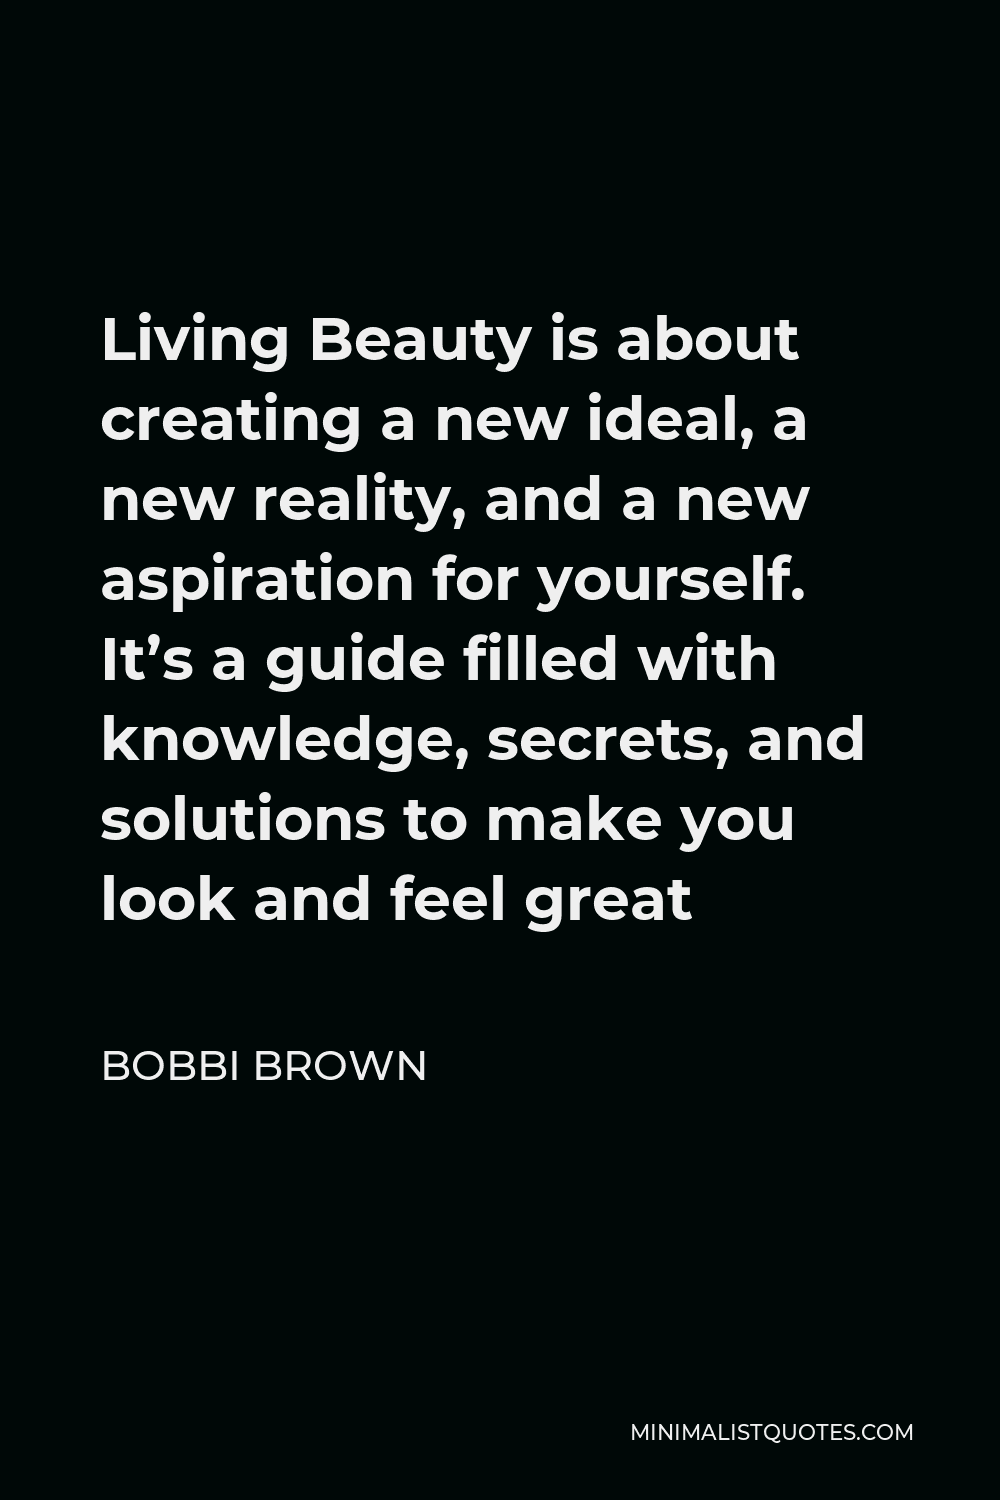 Bobbi Brown Quote - Living Beauty is about creating a new ideal, a new reality, and a new aspiration for yourself. It’s a guide filled with knowledge, secrets, and solutions to make you look and feel great